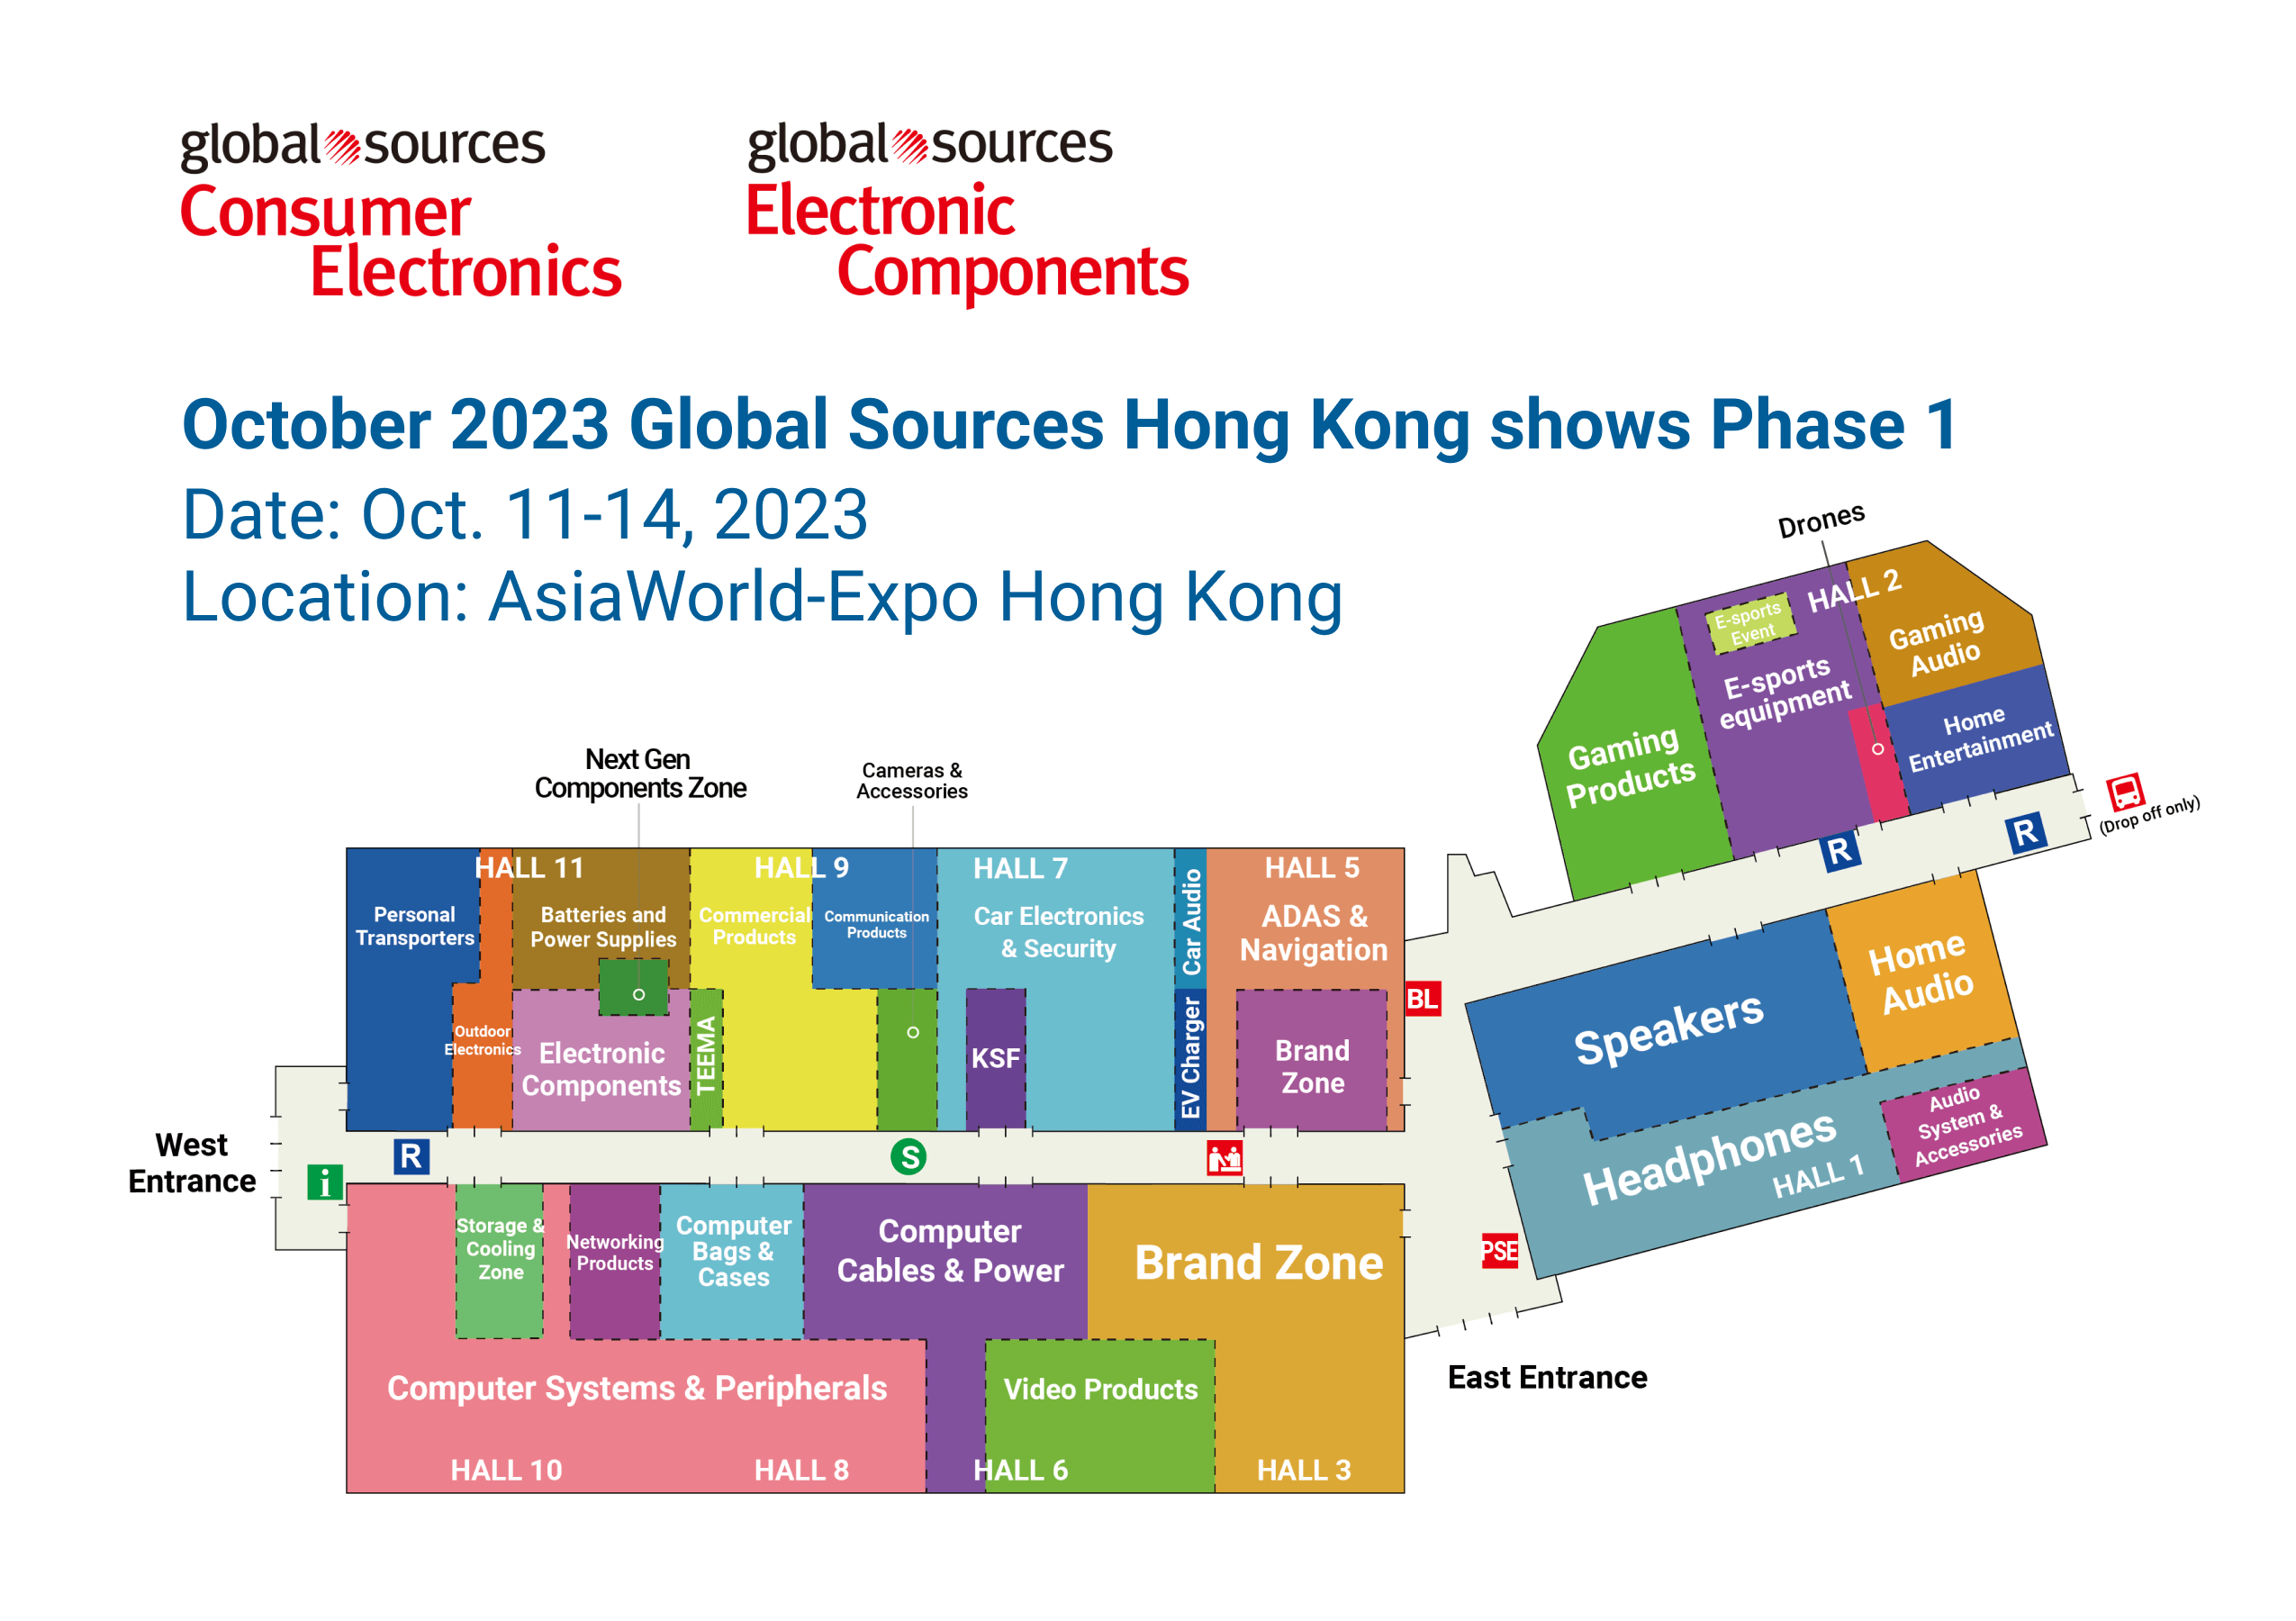 Hong Kong Convention and Exhibition Centre,Date: Oct 13-16, 2023,Booth: 3F-E04